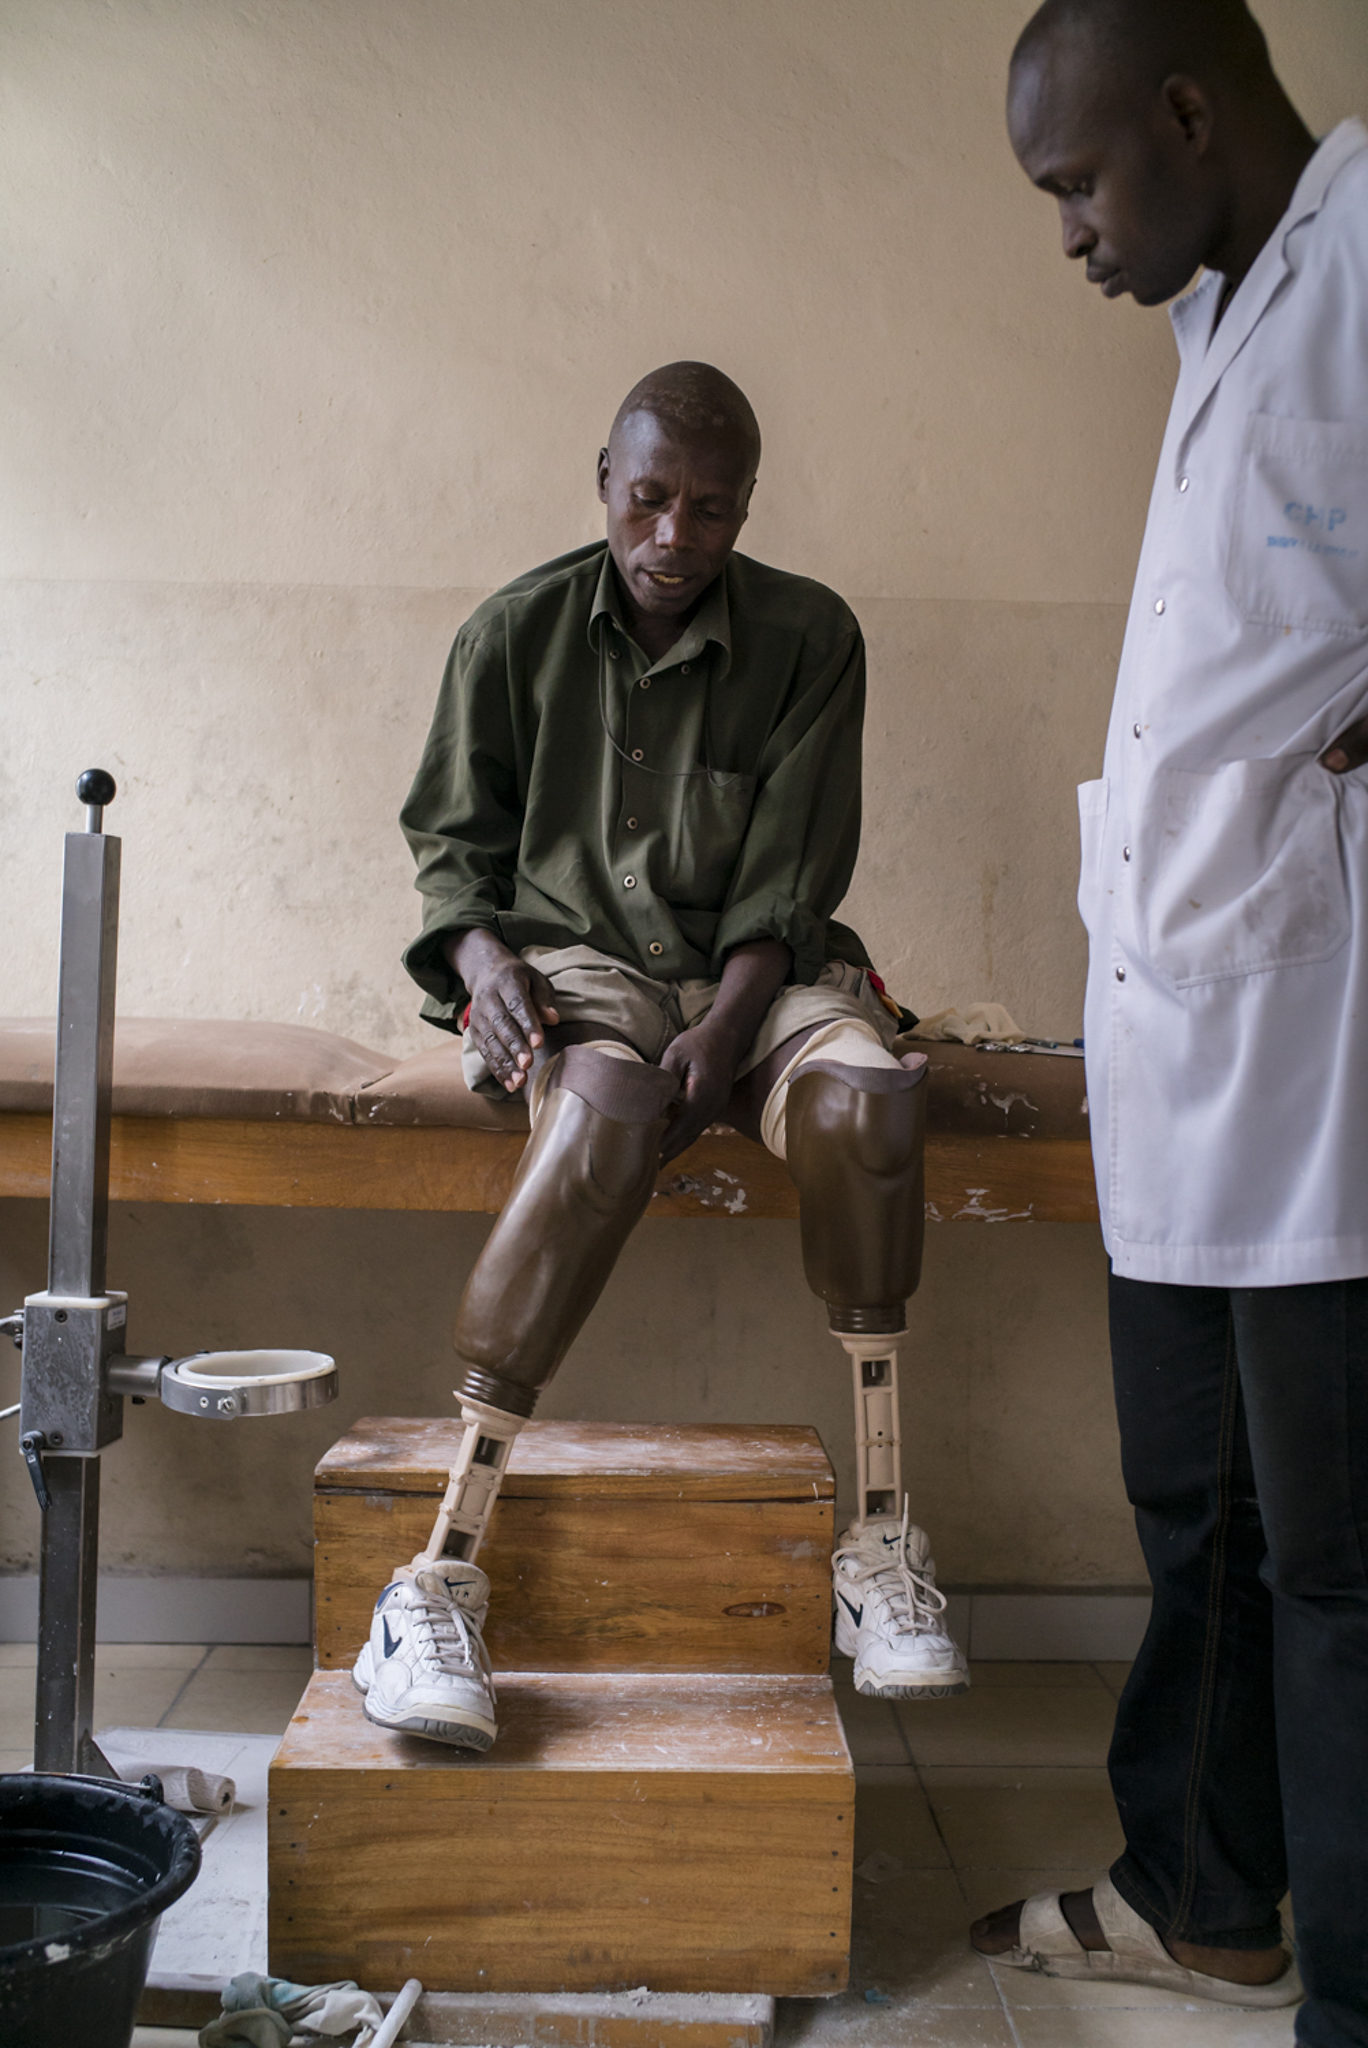  Augustin Semayinga Rukara, 51, a double amputee and father of eight, he puts on his prosthetic limb at a doctor's office. Augustin’s village of Mpati, in Masisi territory of North Kivu,&nbsp;was attacked in June 2013 and he lost his right leg after 